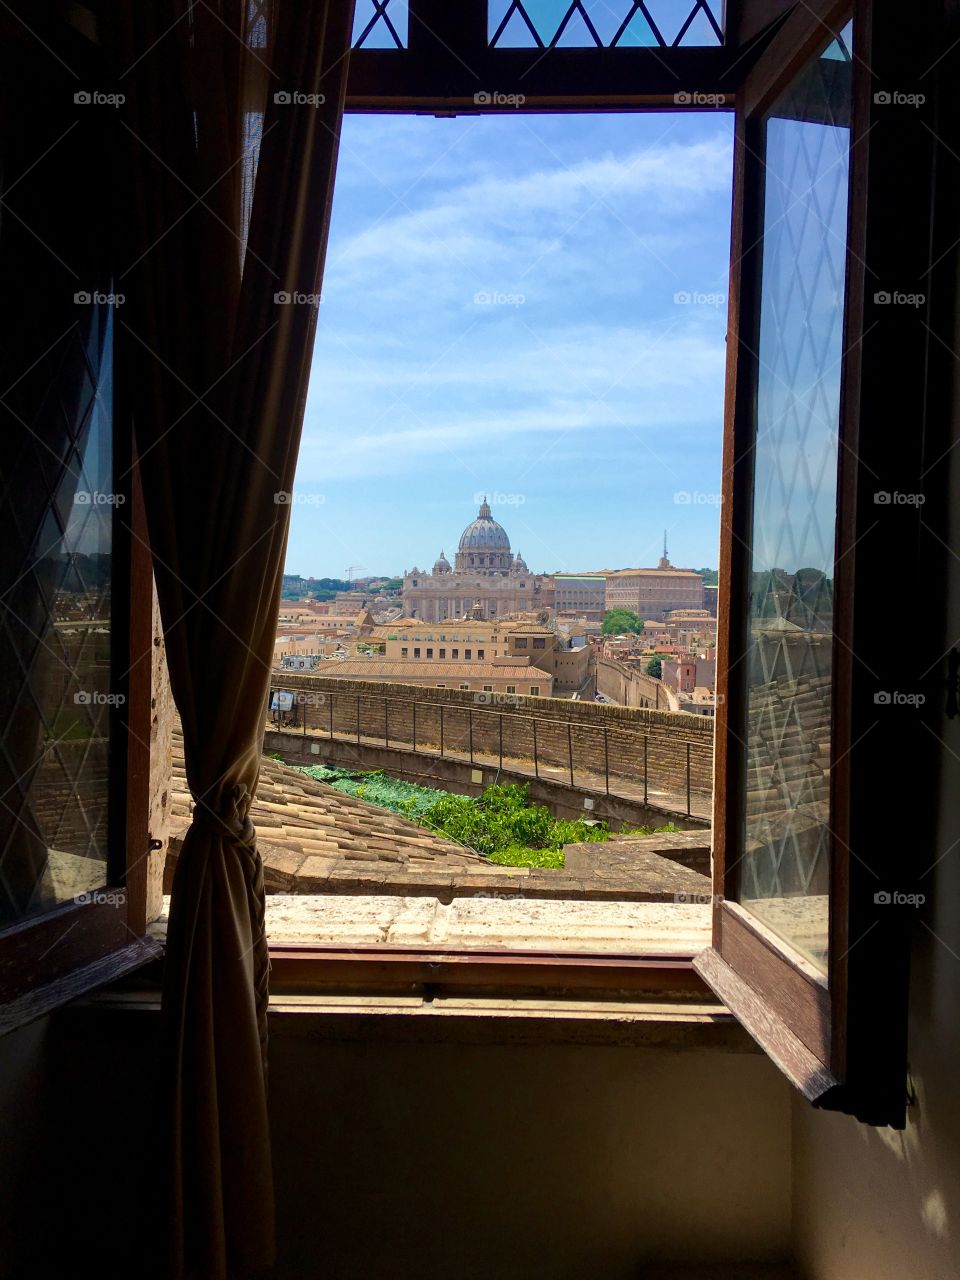 St Peter's Basilica from a window in Castel San Angelo
